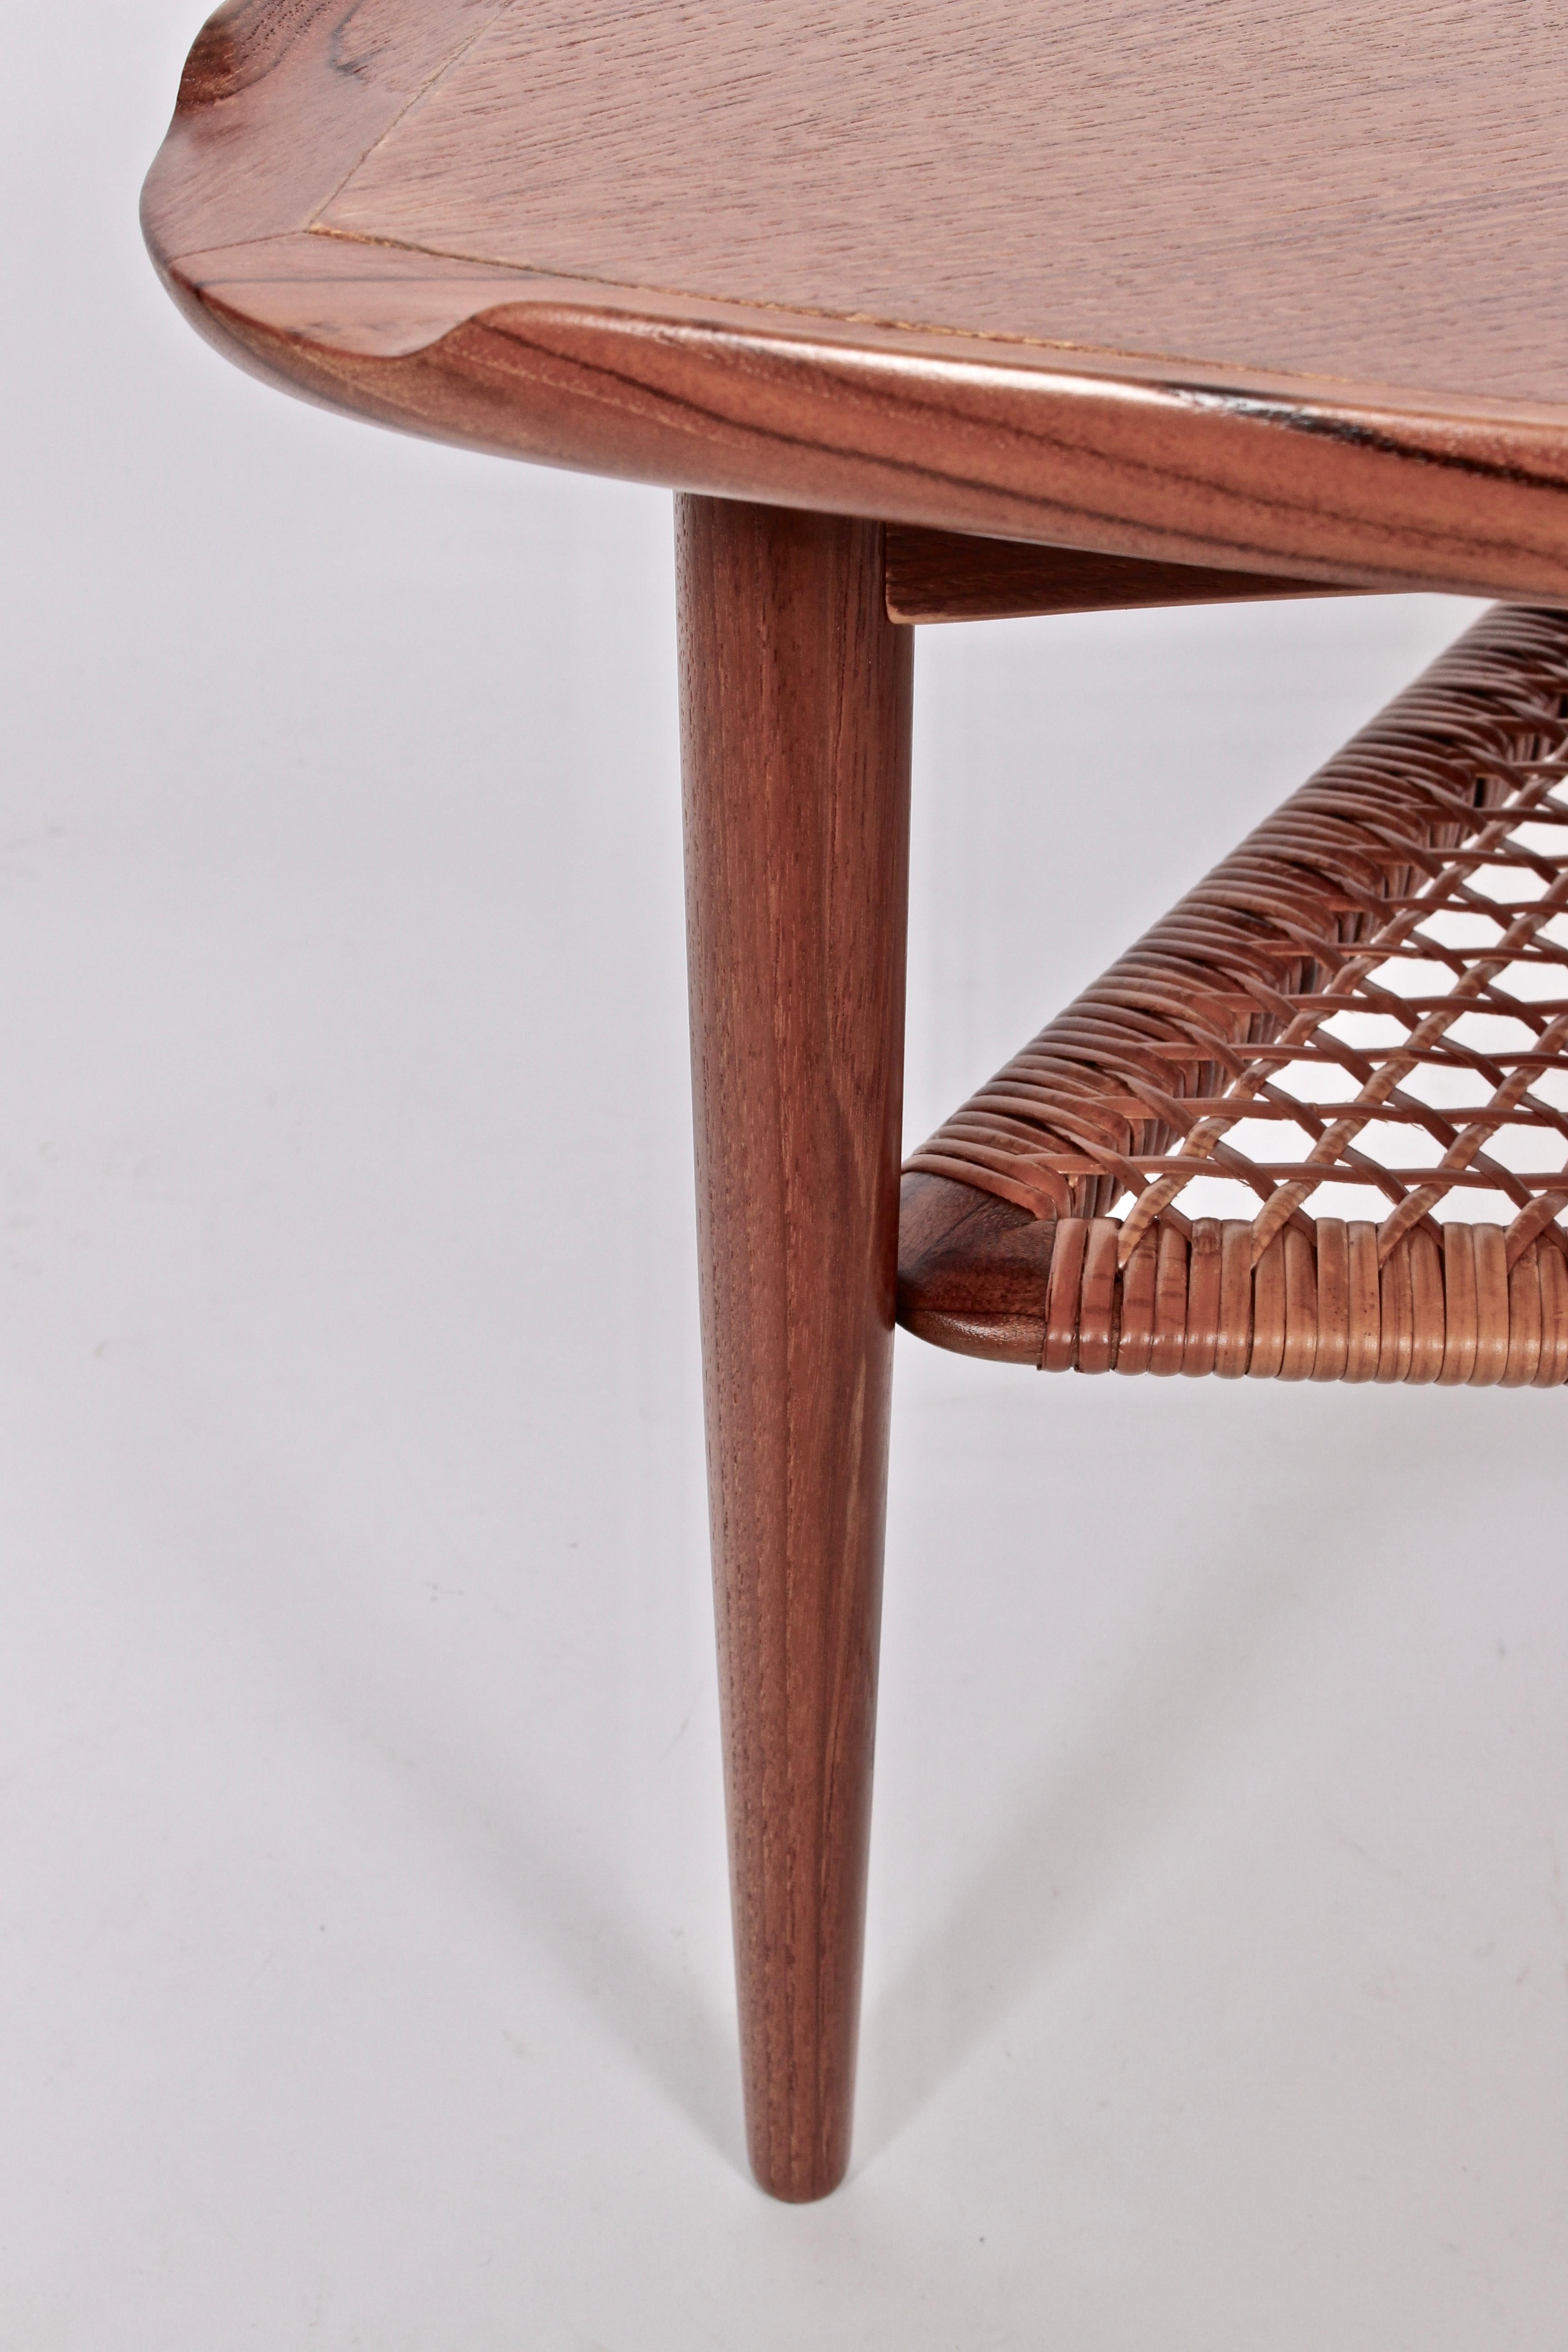 Mid-20th Century Poul Jensen for Selig Teak Tripod Table with Woven Cane Shelf, 1960's For Sale